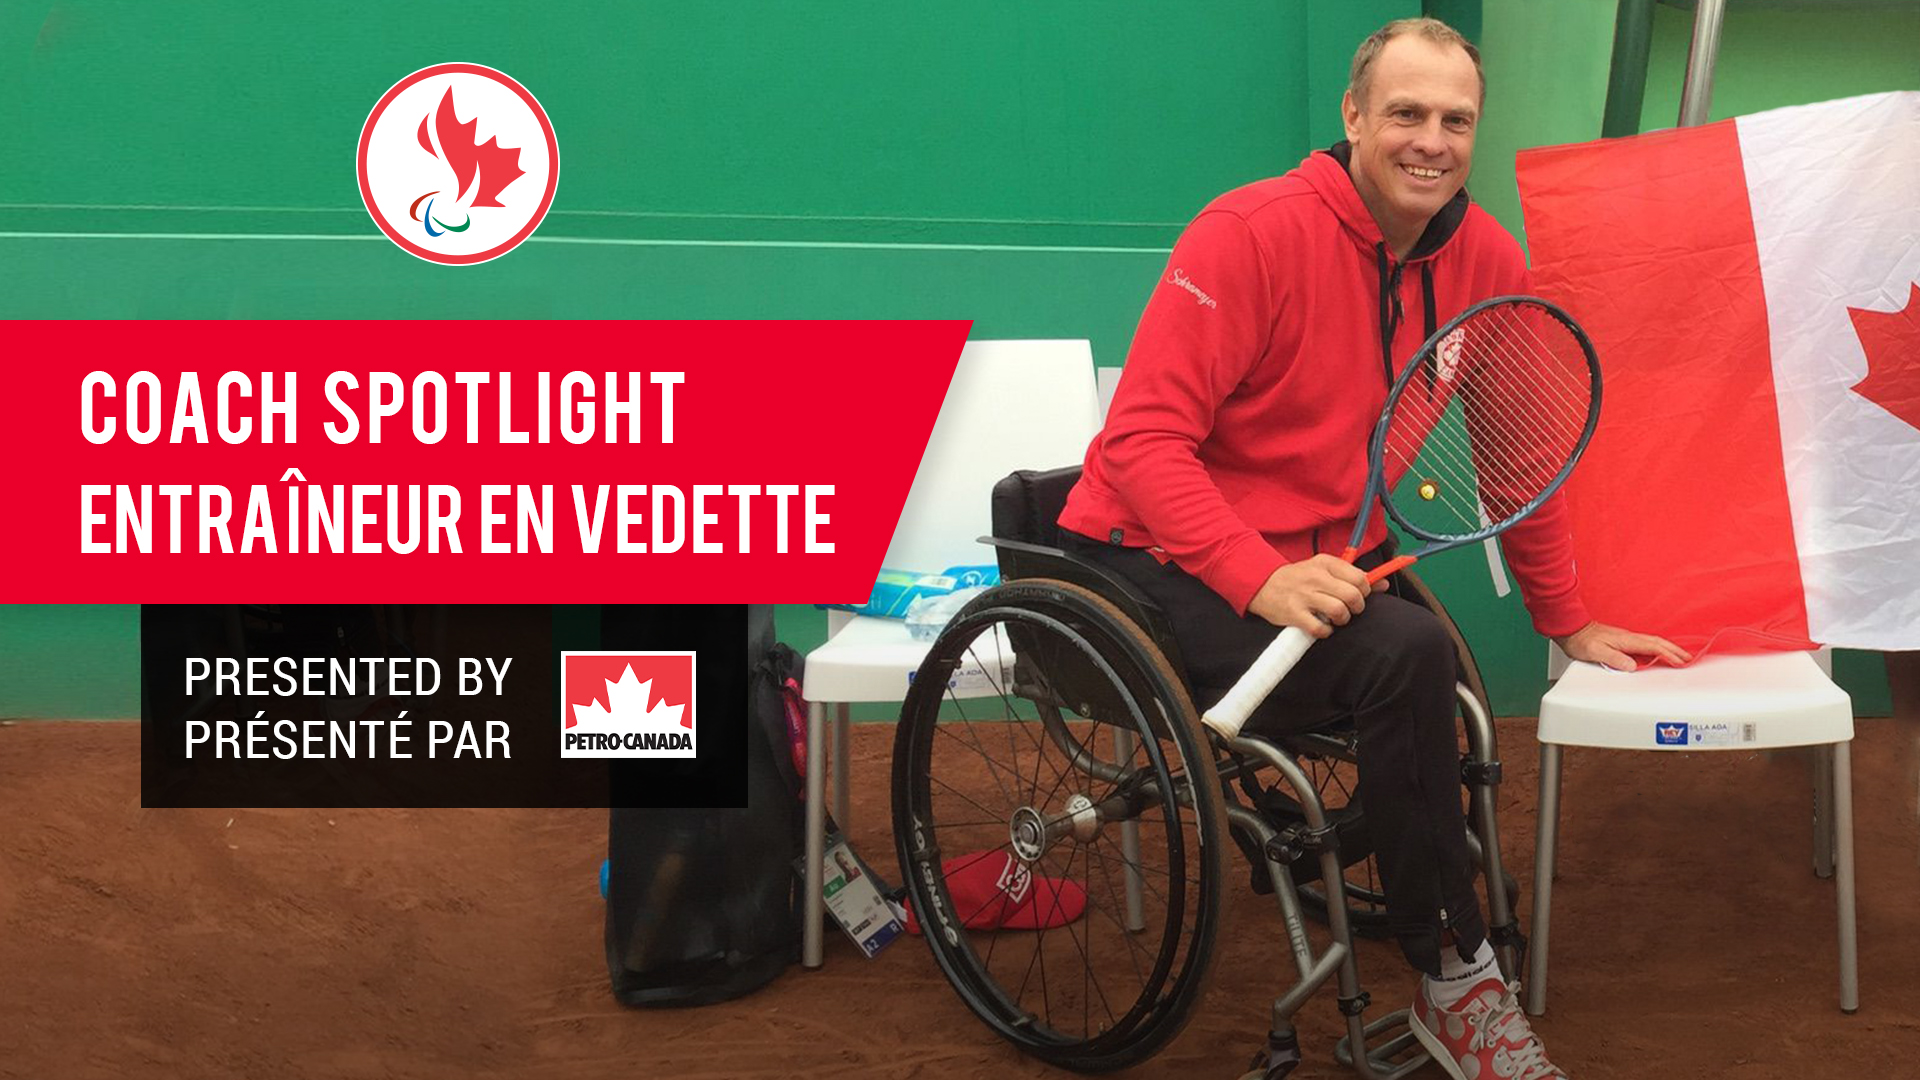 Kai Schrameyer smiling at the camera holding his tennis racquet next to a Canadian flag with the text Coach Spotlight over the graphic